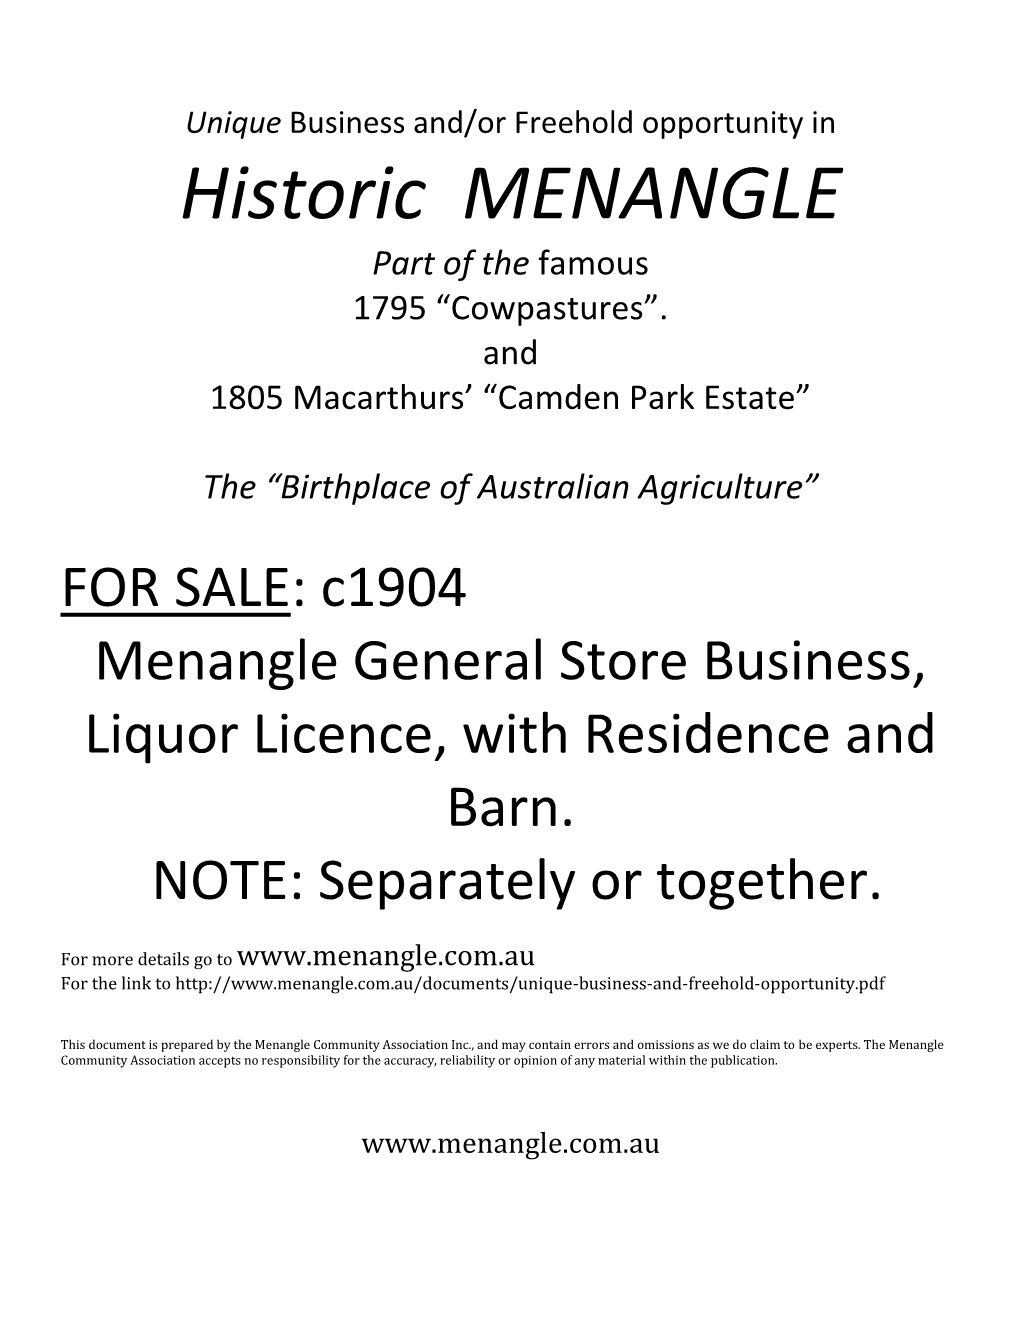 Menangle Store, Residence and Barn: Business And/Or Property